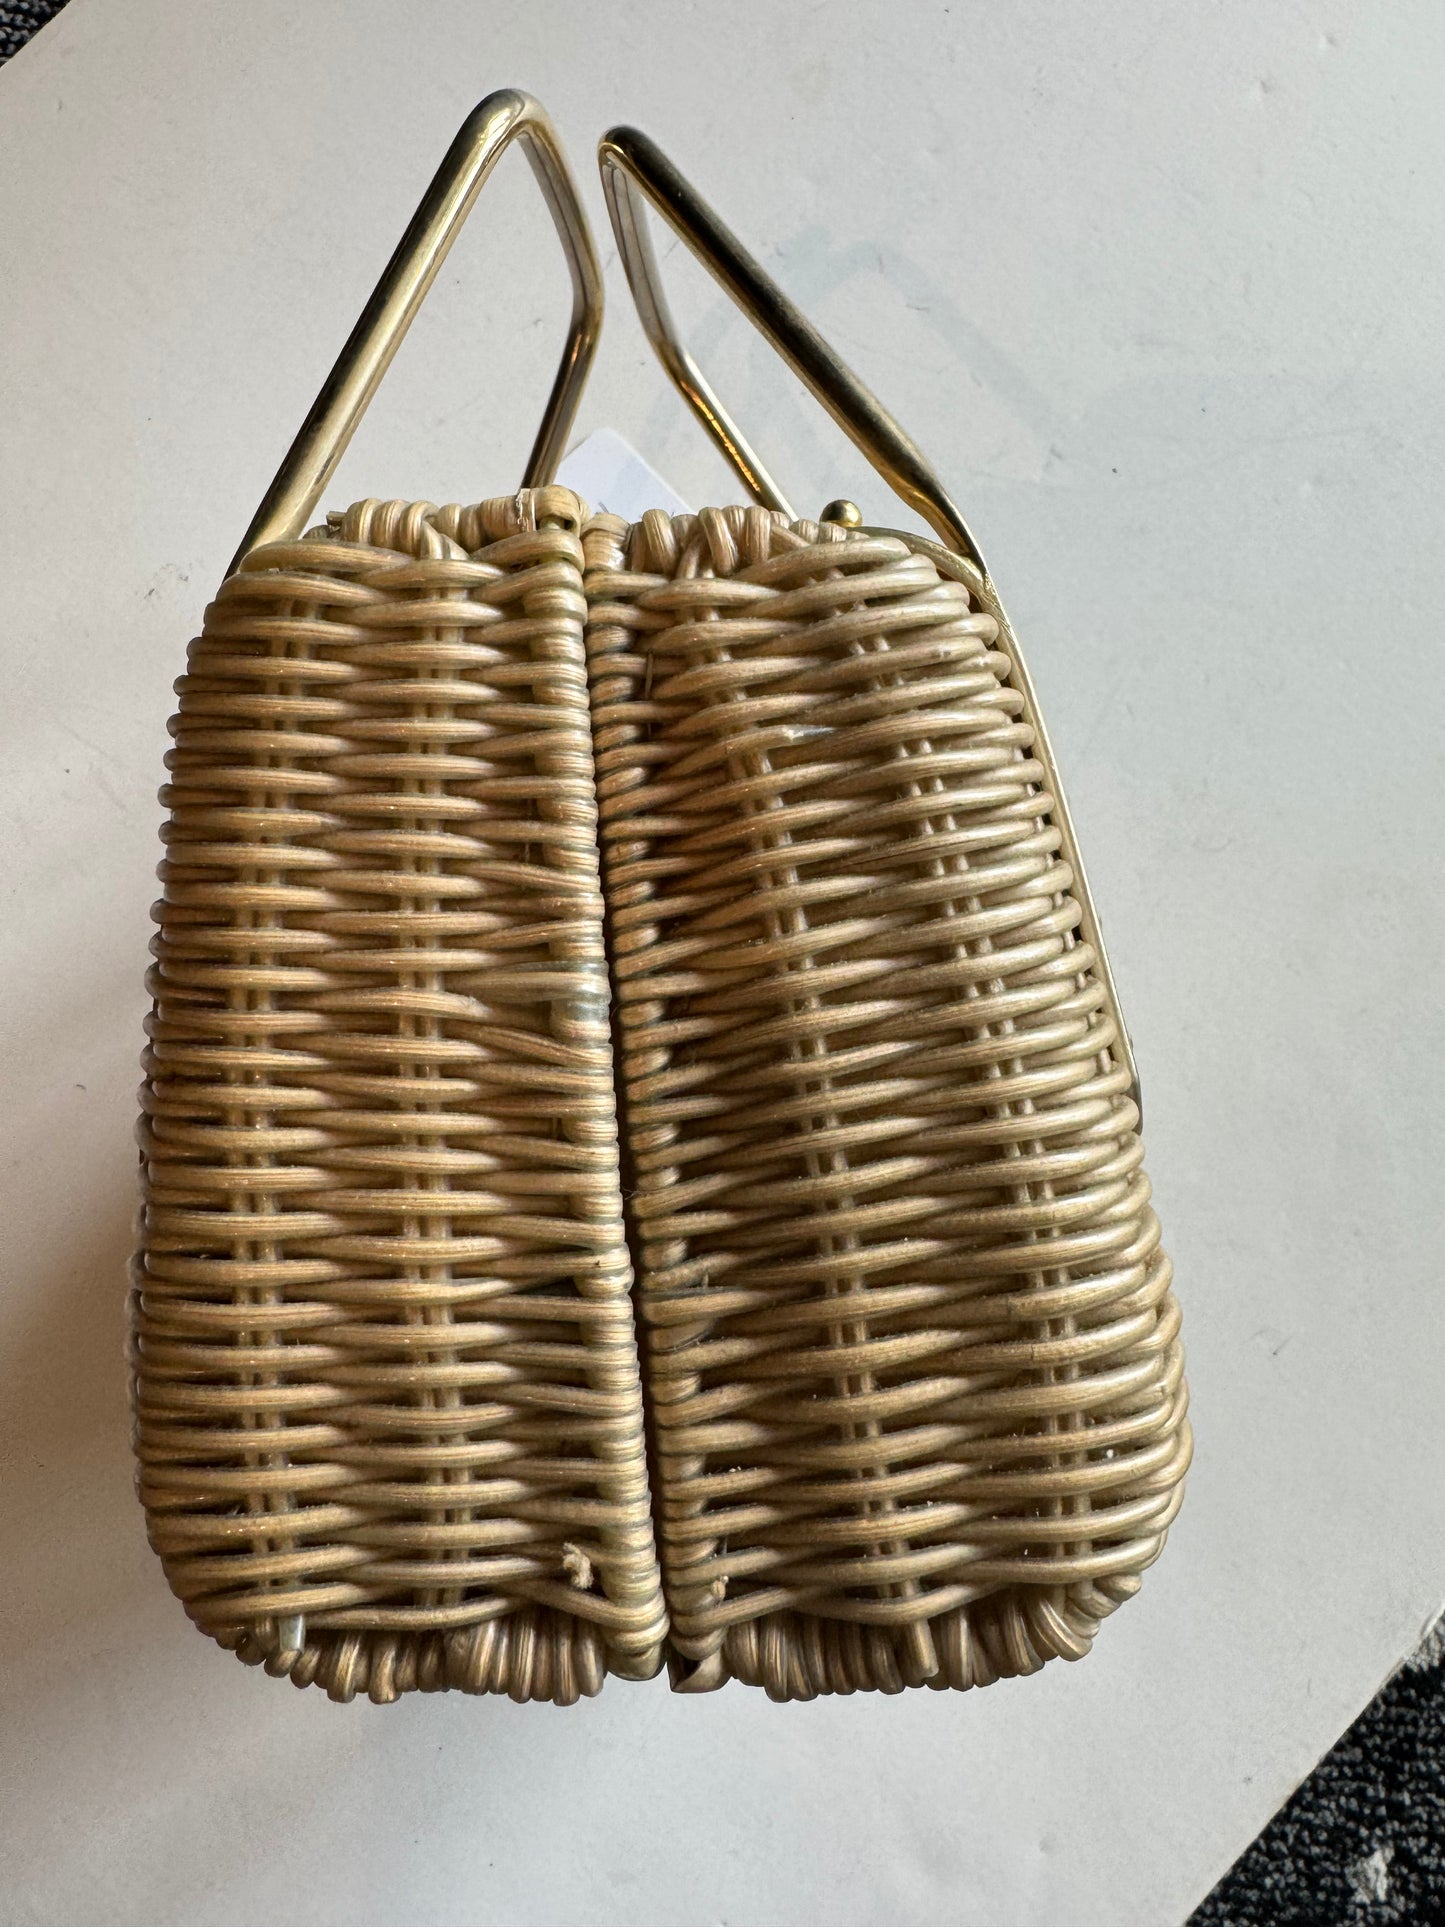 Adorable 1950s rattan box bag with gold hardware